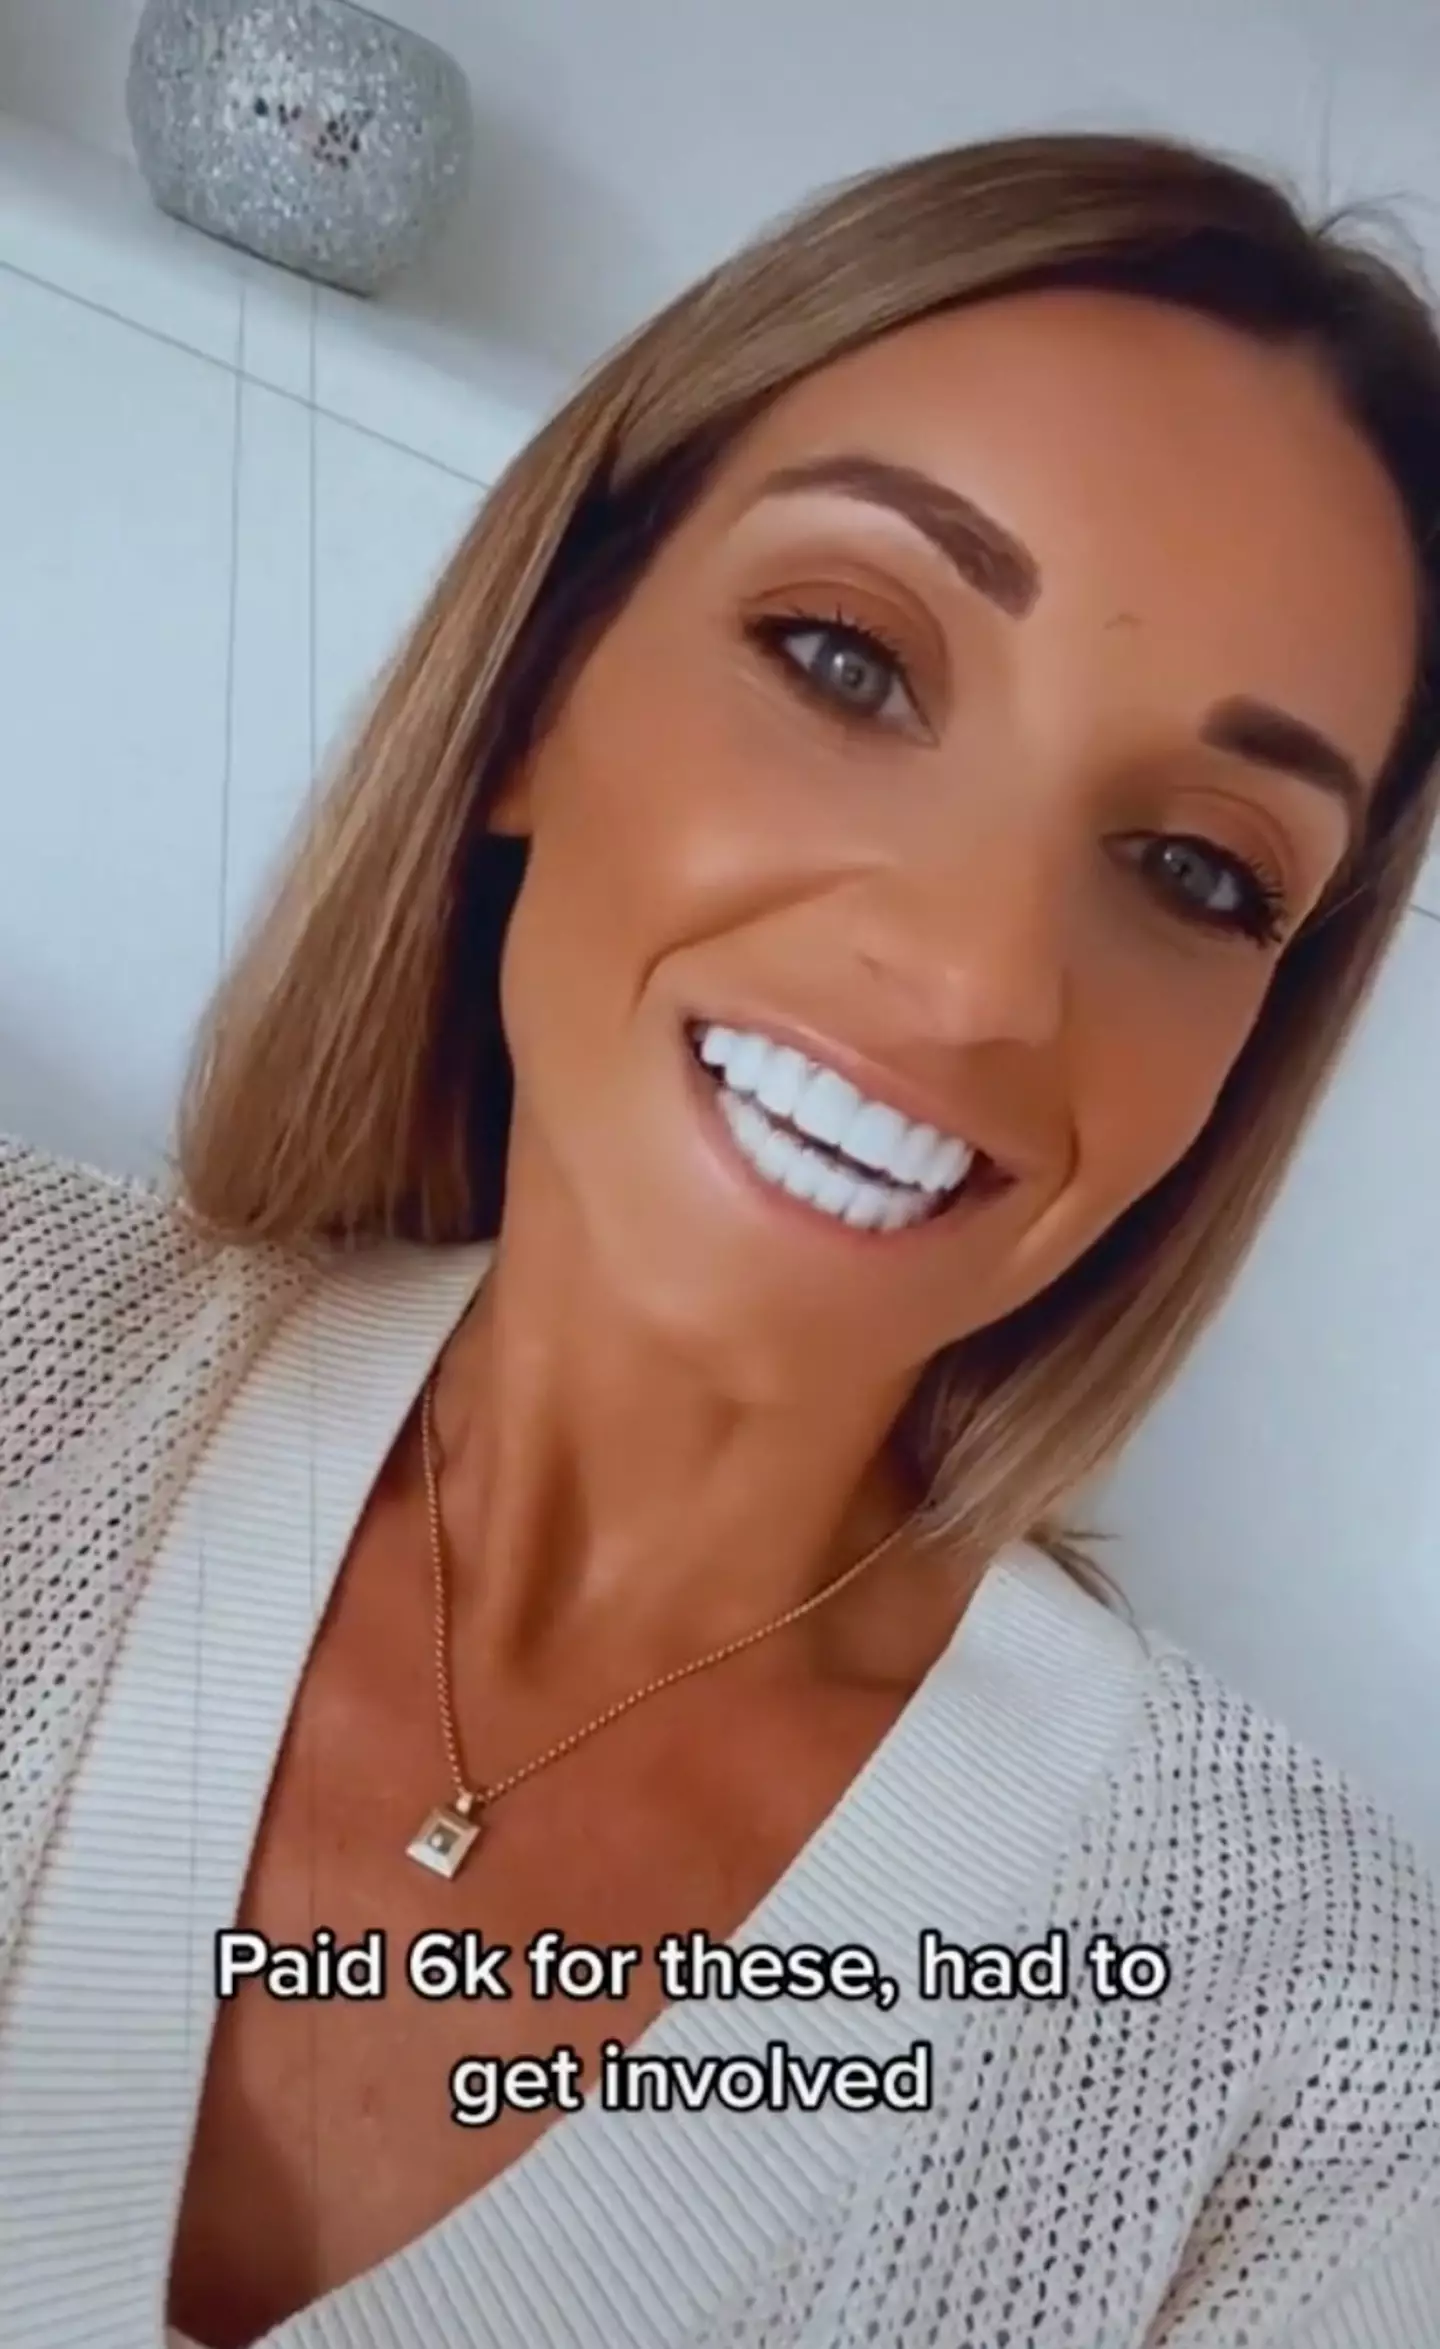 One woman has shared her horrendous ‘Turkey teeth’ experience.